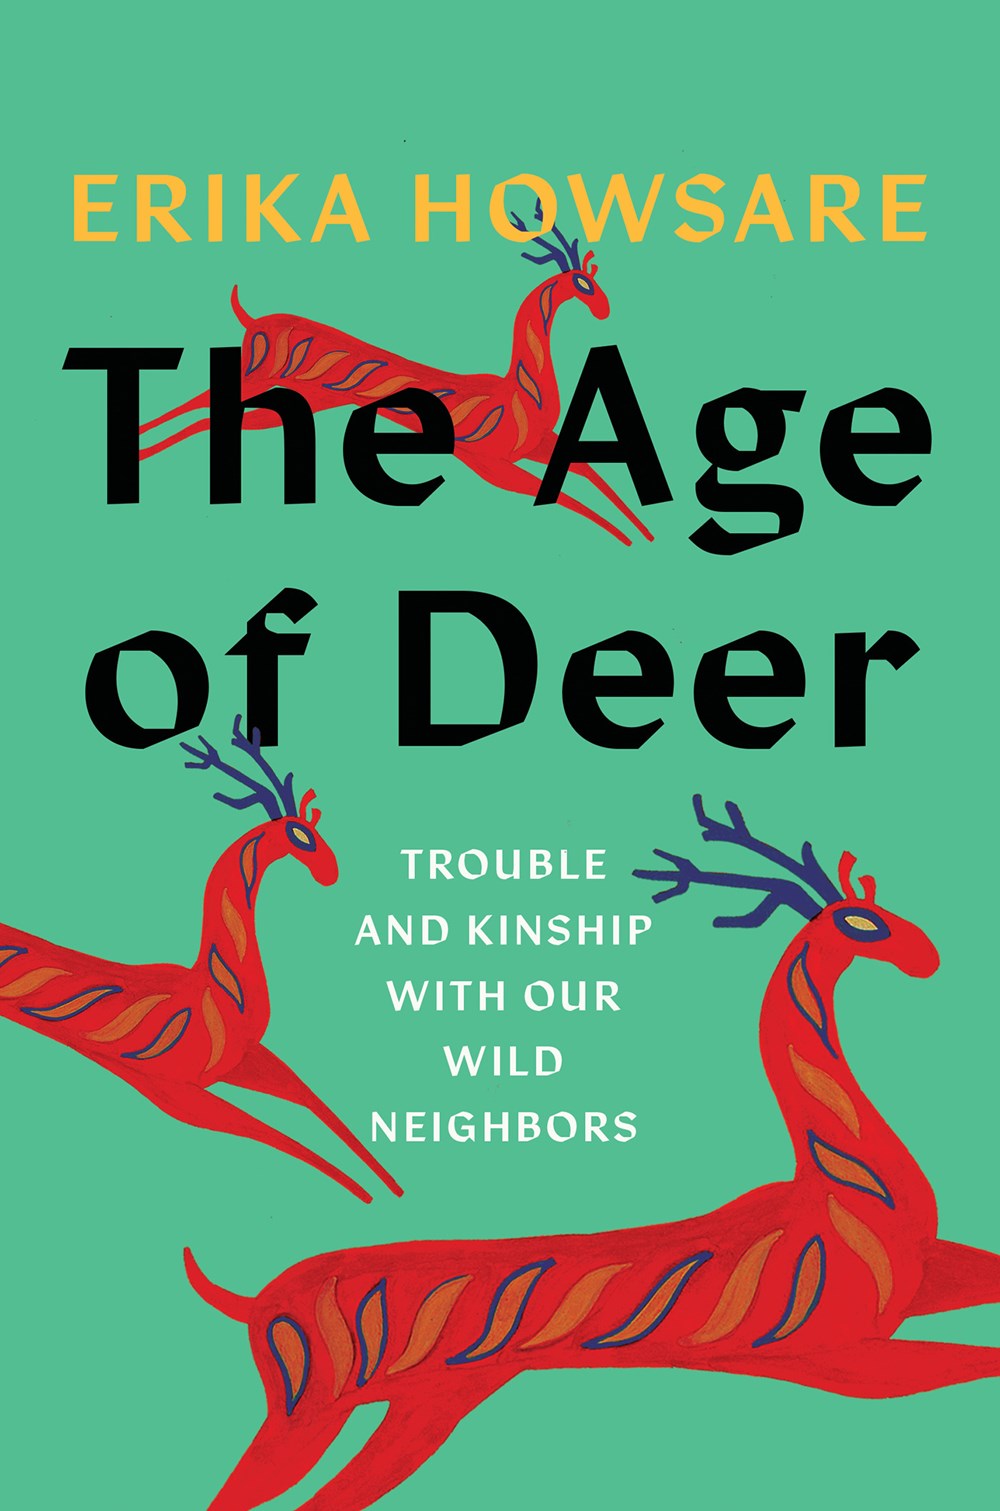 The Age of Deer: Trouble and Kinship with Our Wild Neighbors by Erika Howsare (1/2/24)